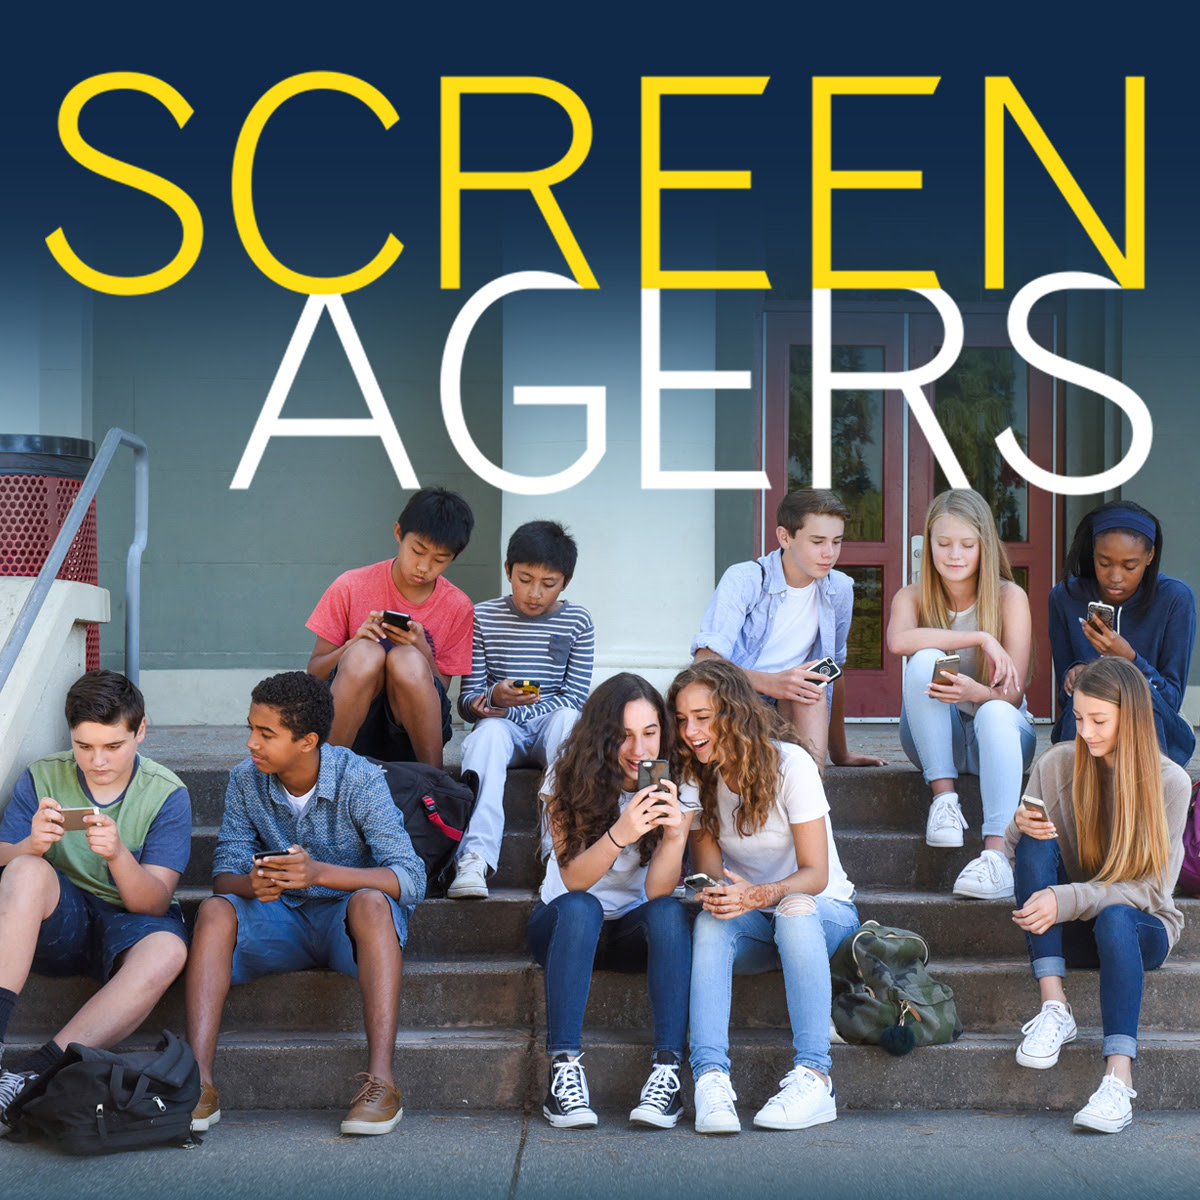 Screenagers Film Presented By BFCCPS